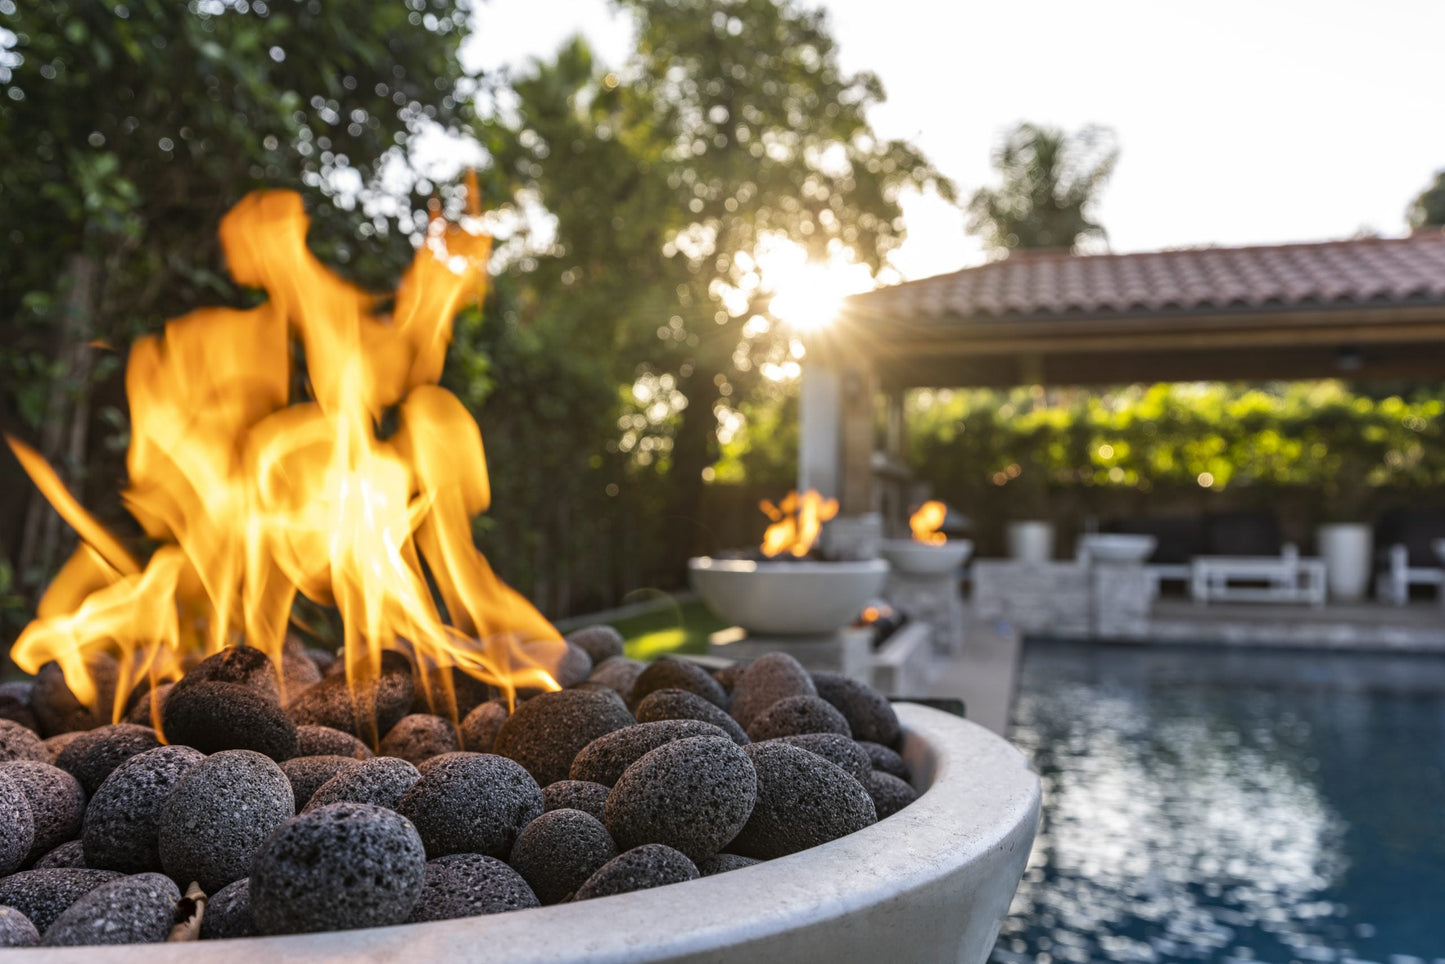 The Outdoor Plus Round Luna 38" Vanilla GFRC Concrete Natural Gas Fire Bowl with Match Lit with Flame Sense Ignition